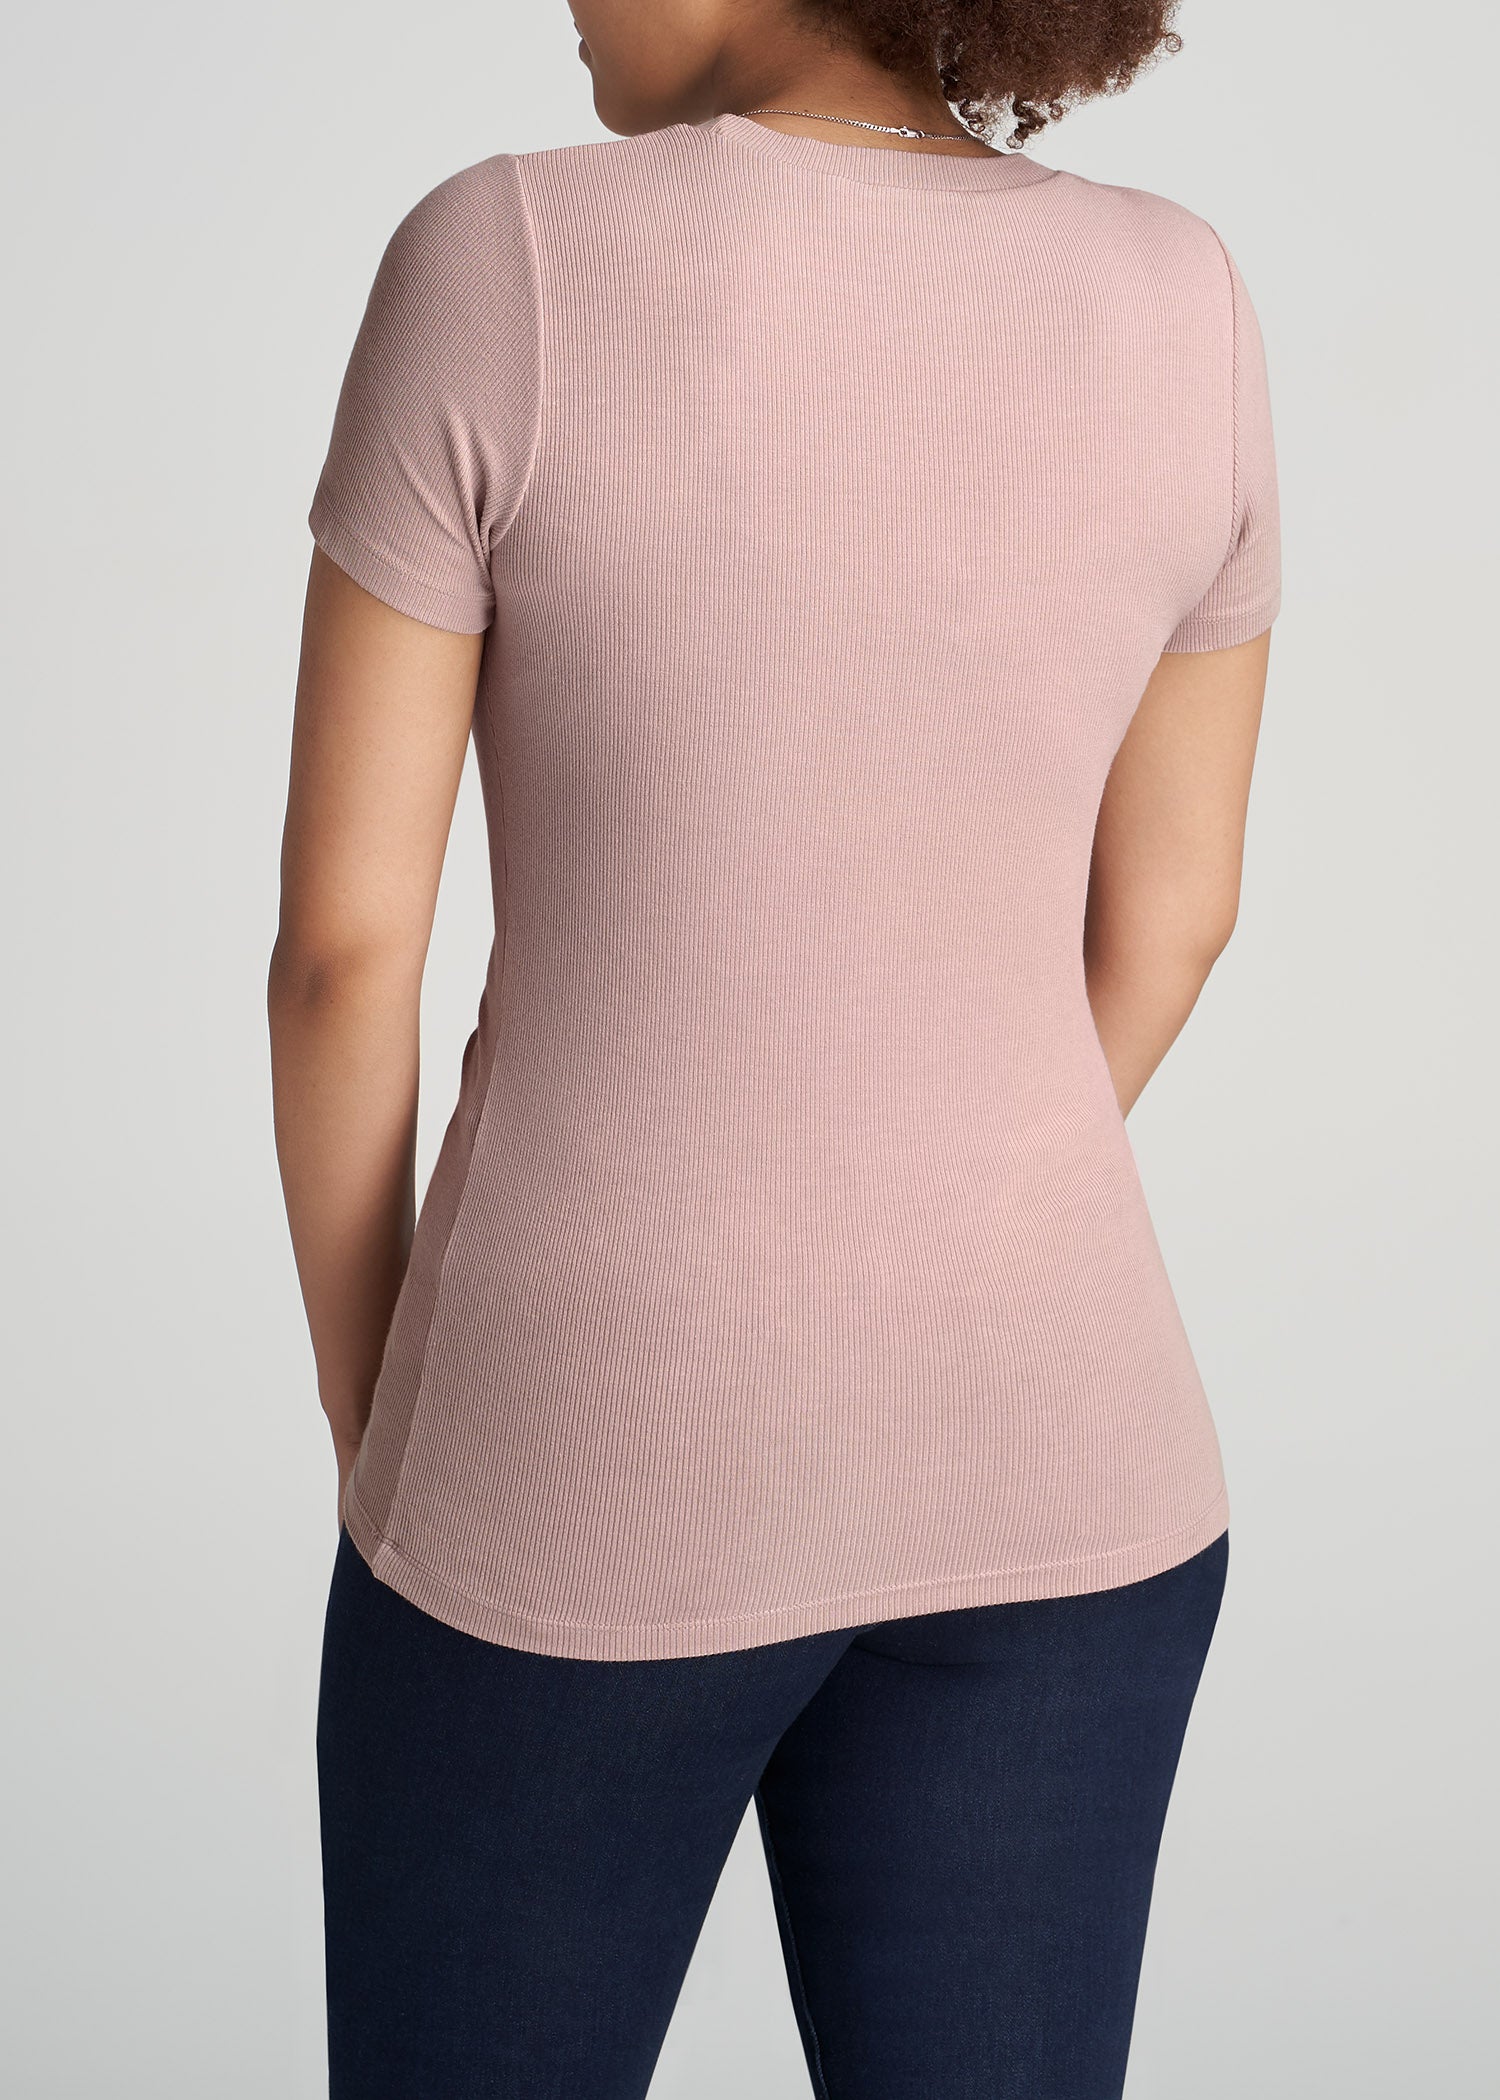 FITTED Ribbed Tee in Deep Water - Women's Tall T-Shirts